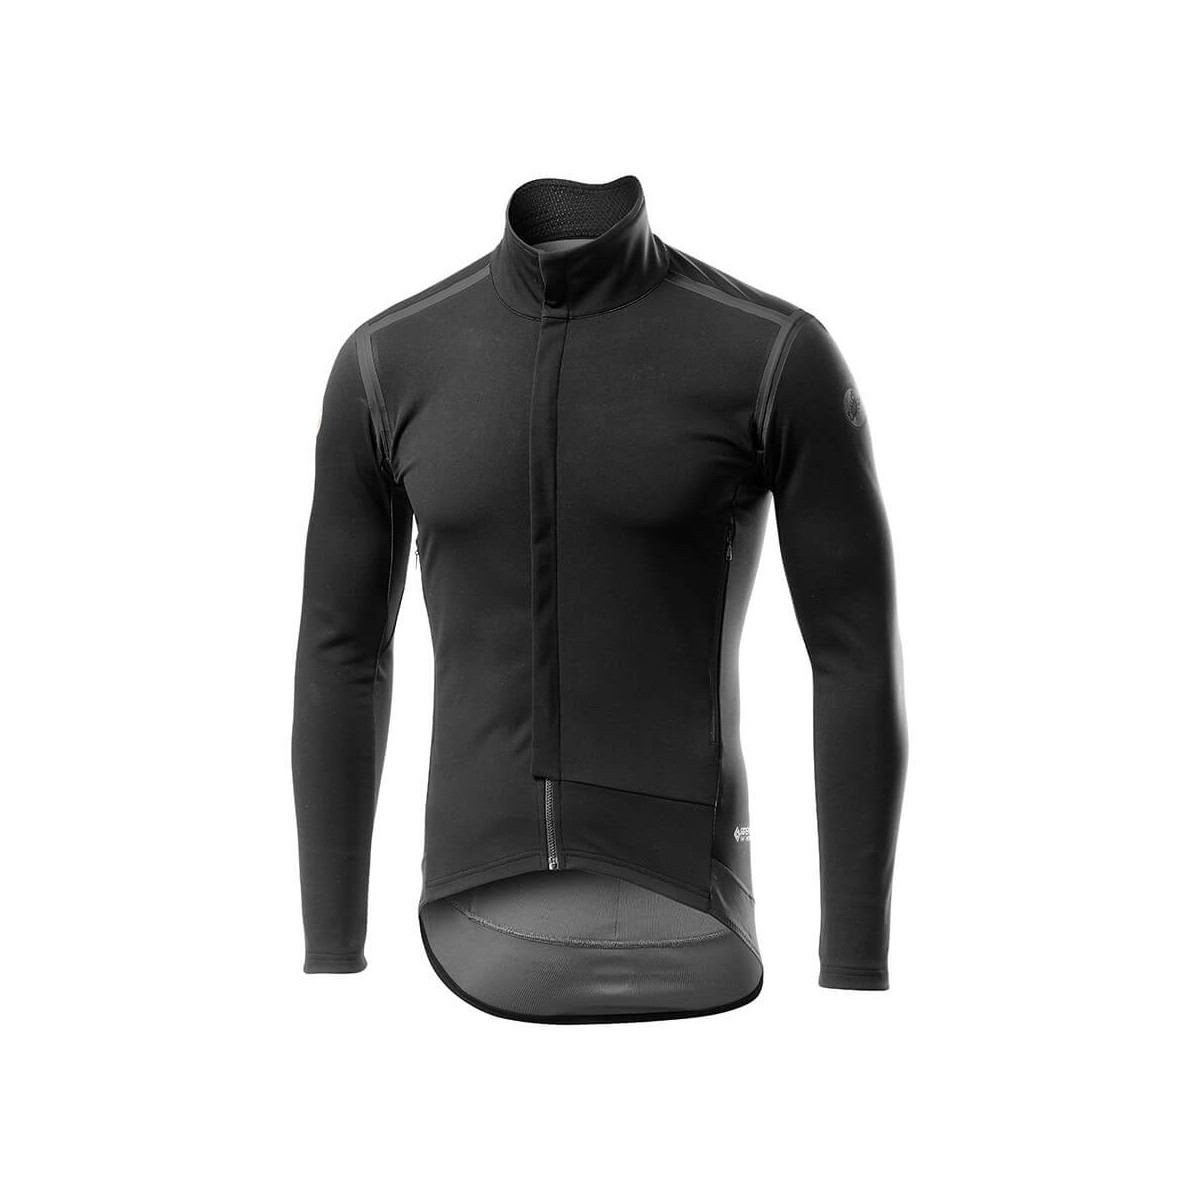 Castelli Perfetto Ros Blackout Limited Edition Jacket, Size M